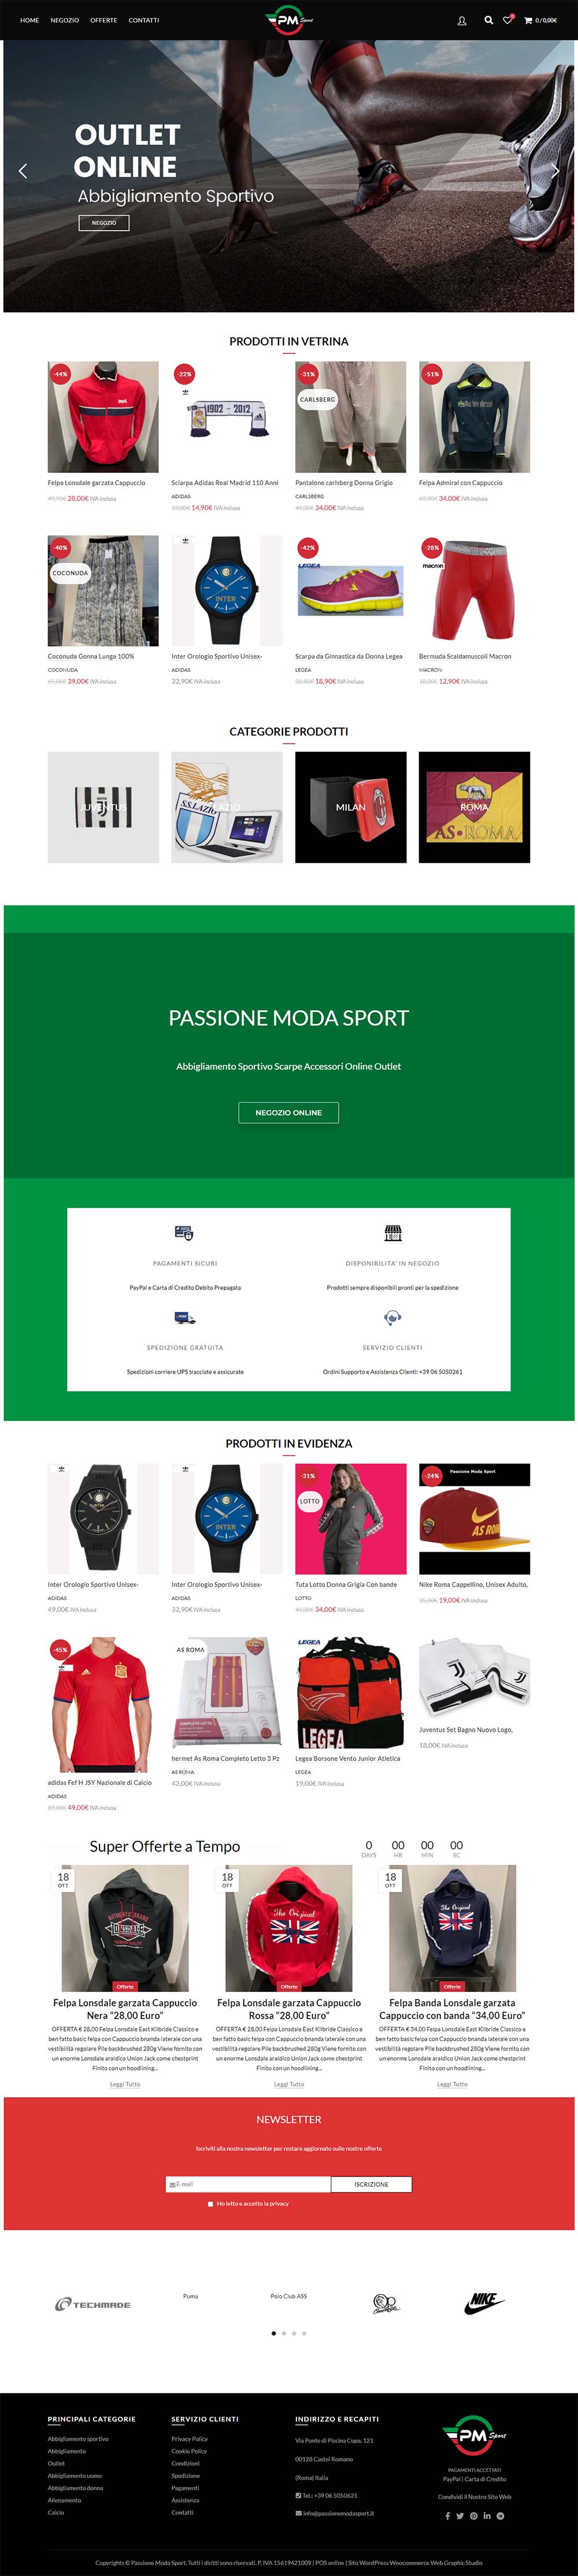 Passione Moda Sport Outlet Online-3